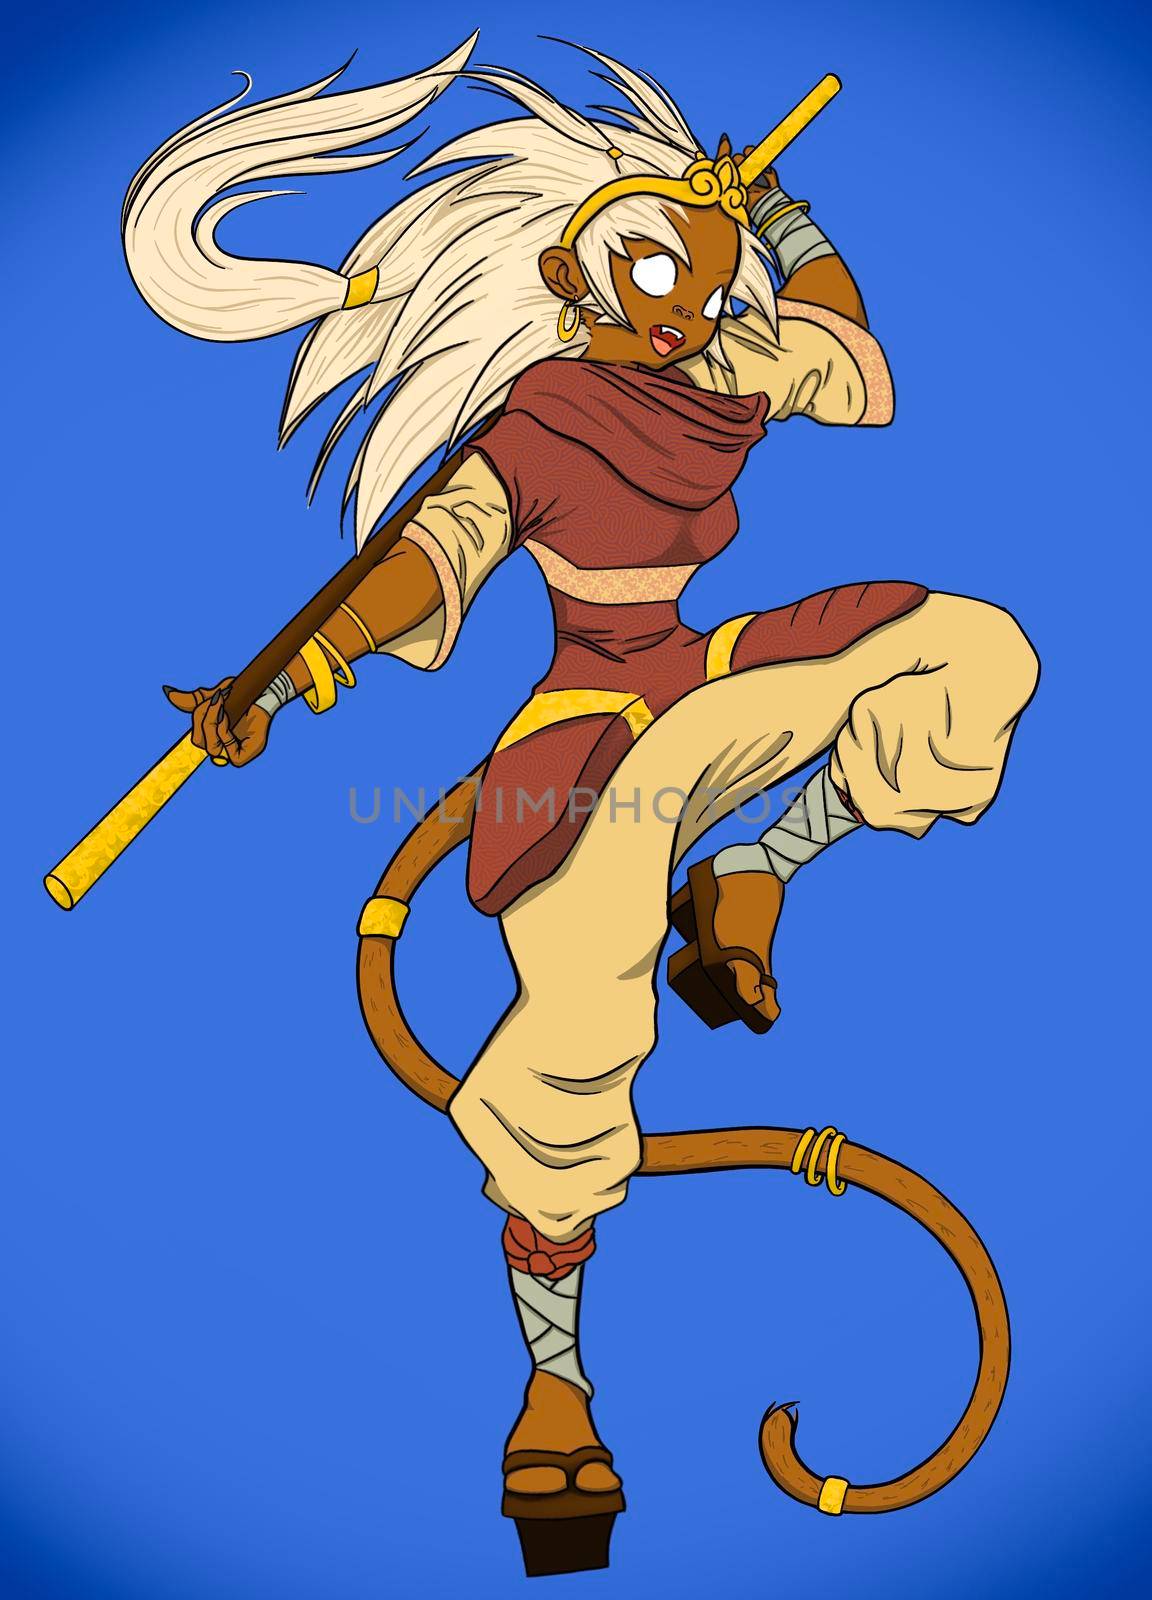 The king of monkeys in female form with a golden staff 2D illustration